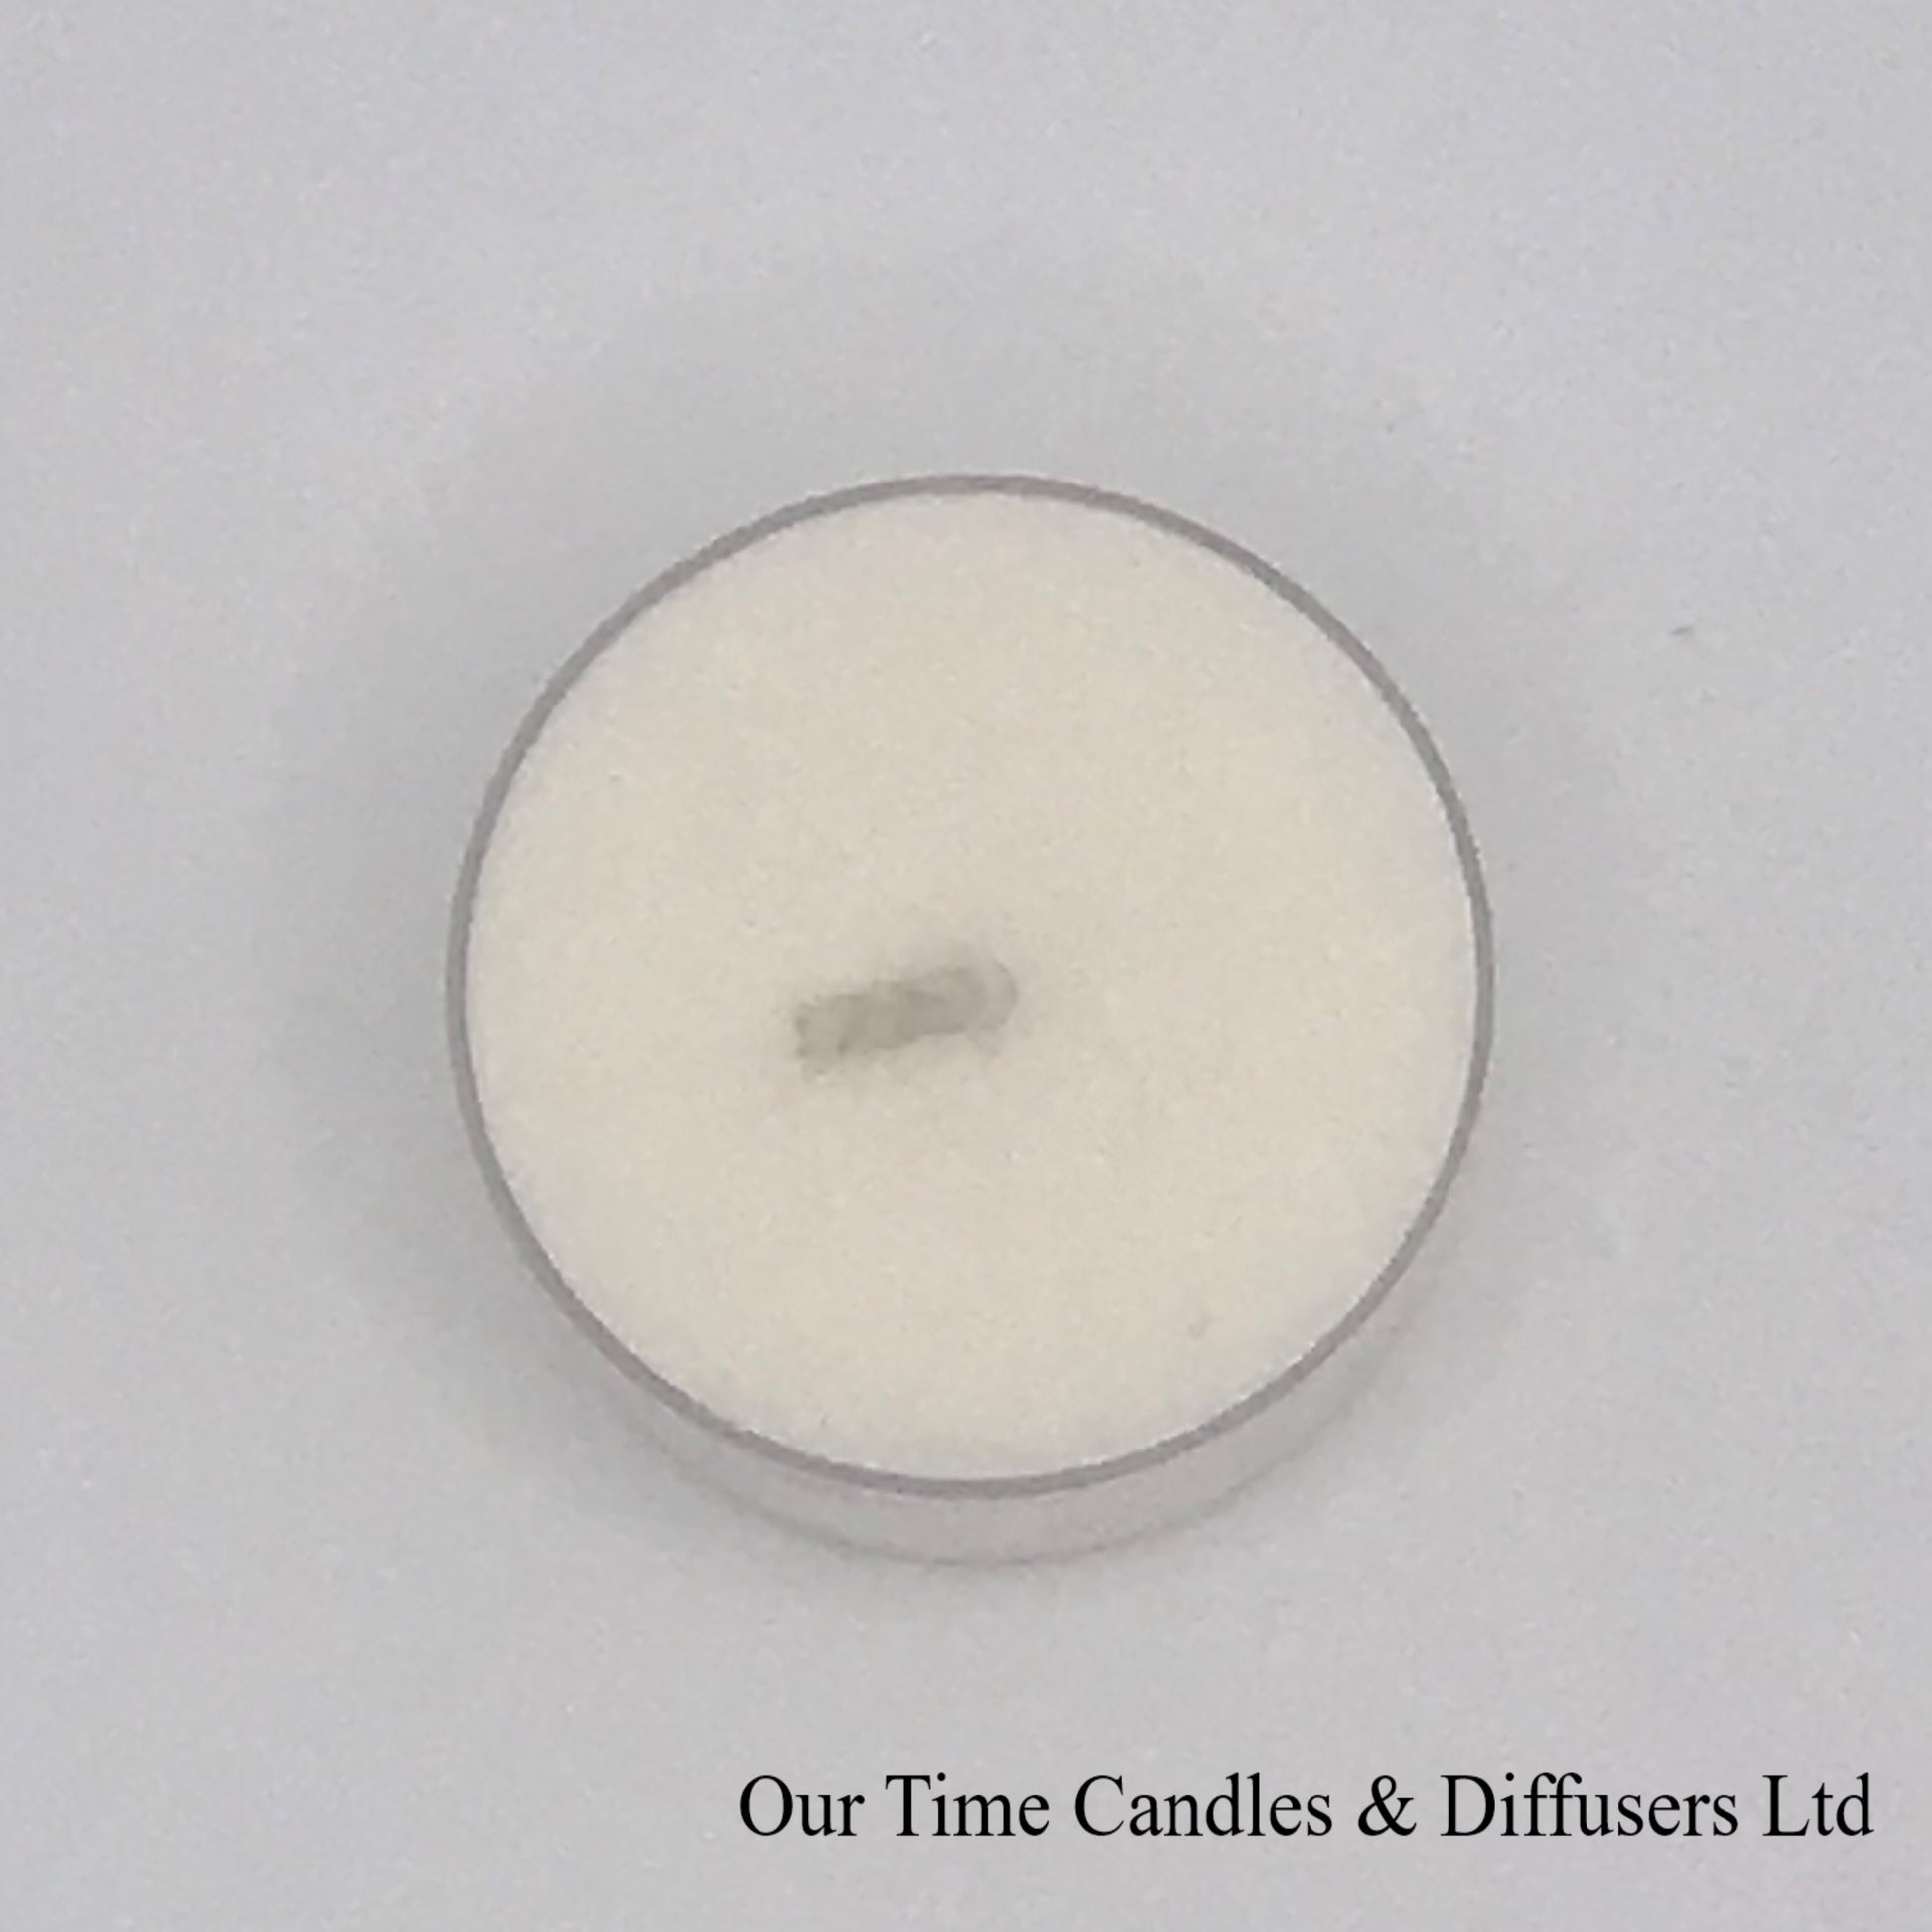 Premium Soy Unscented Tealight